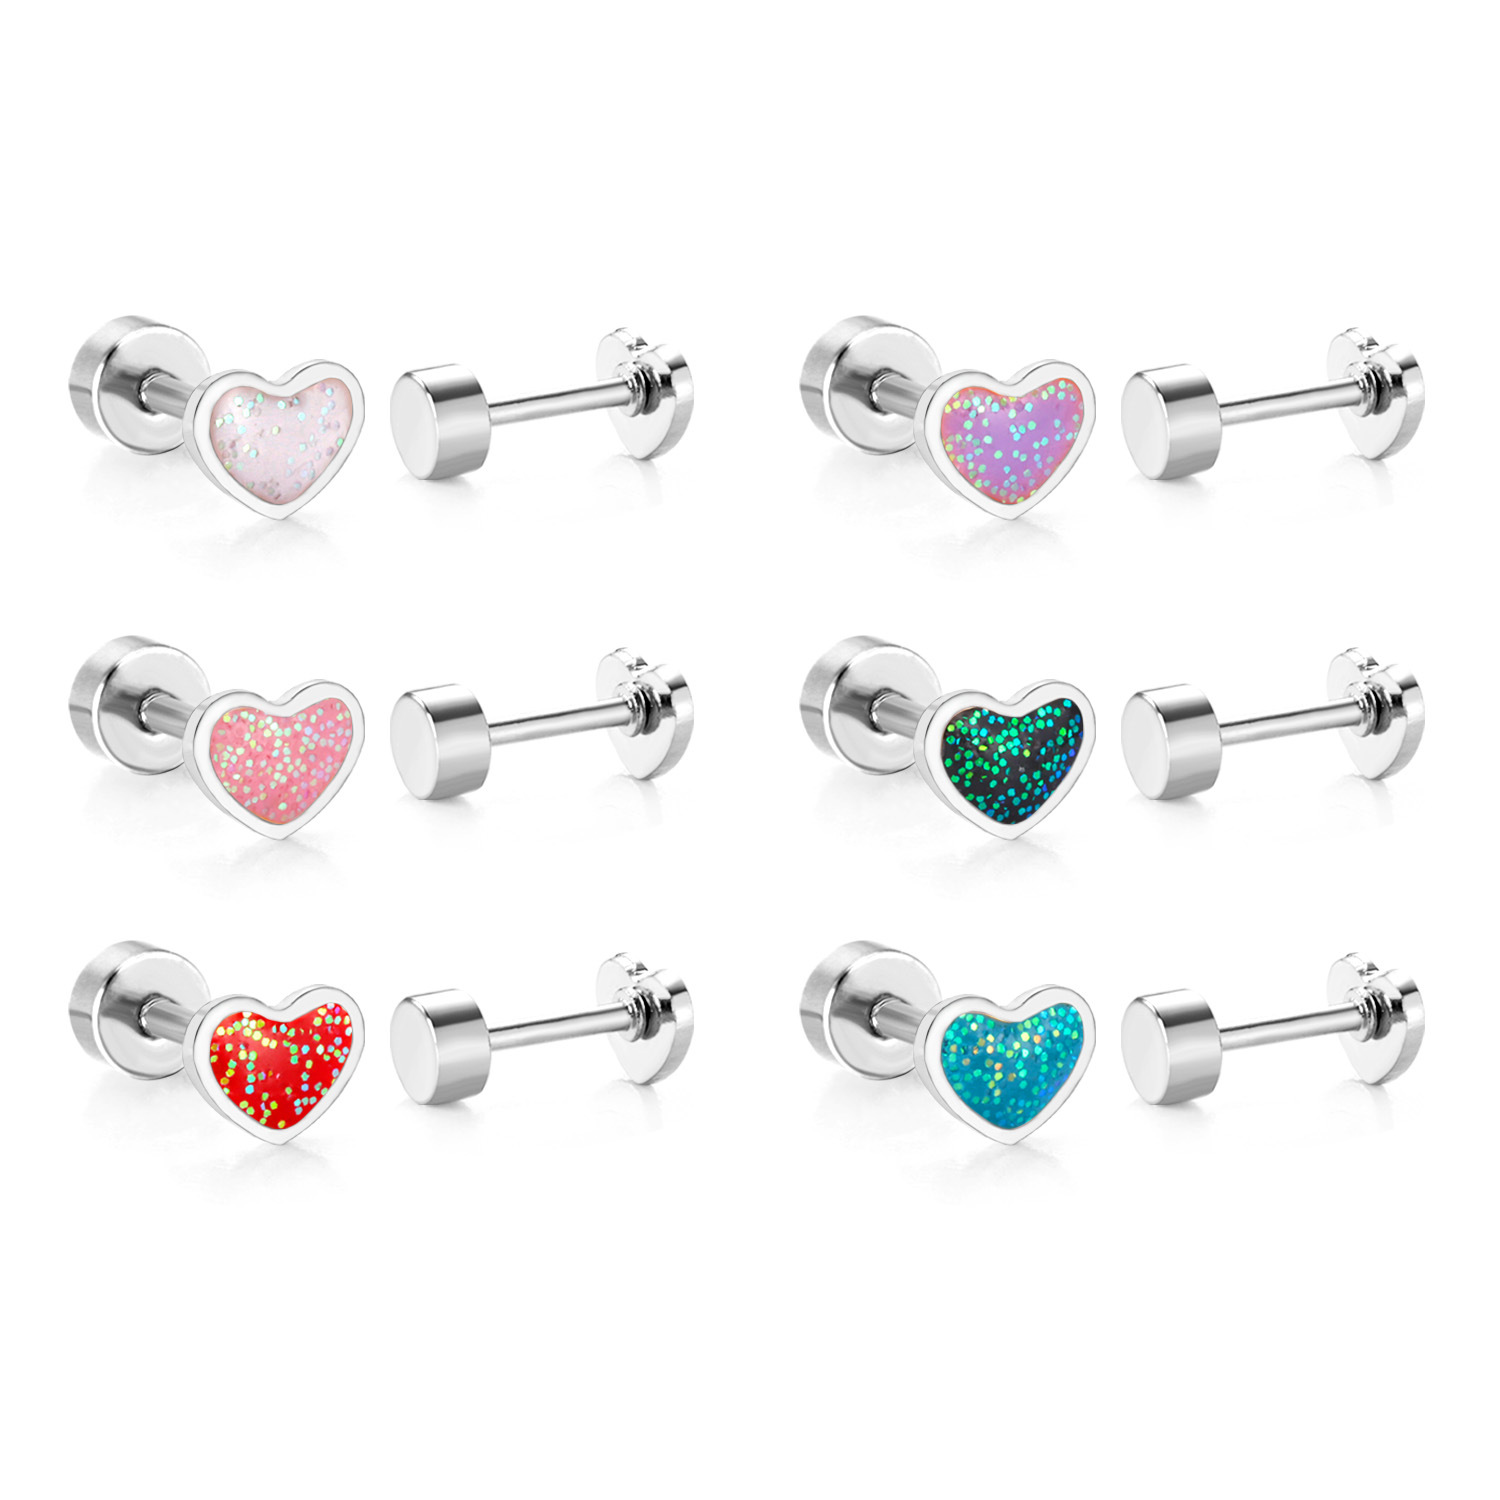 1:Heart-shaped steel color